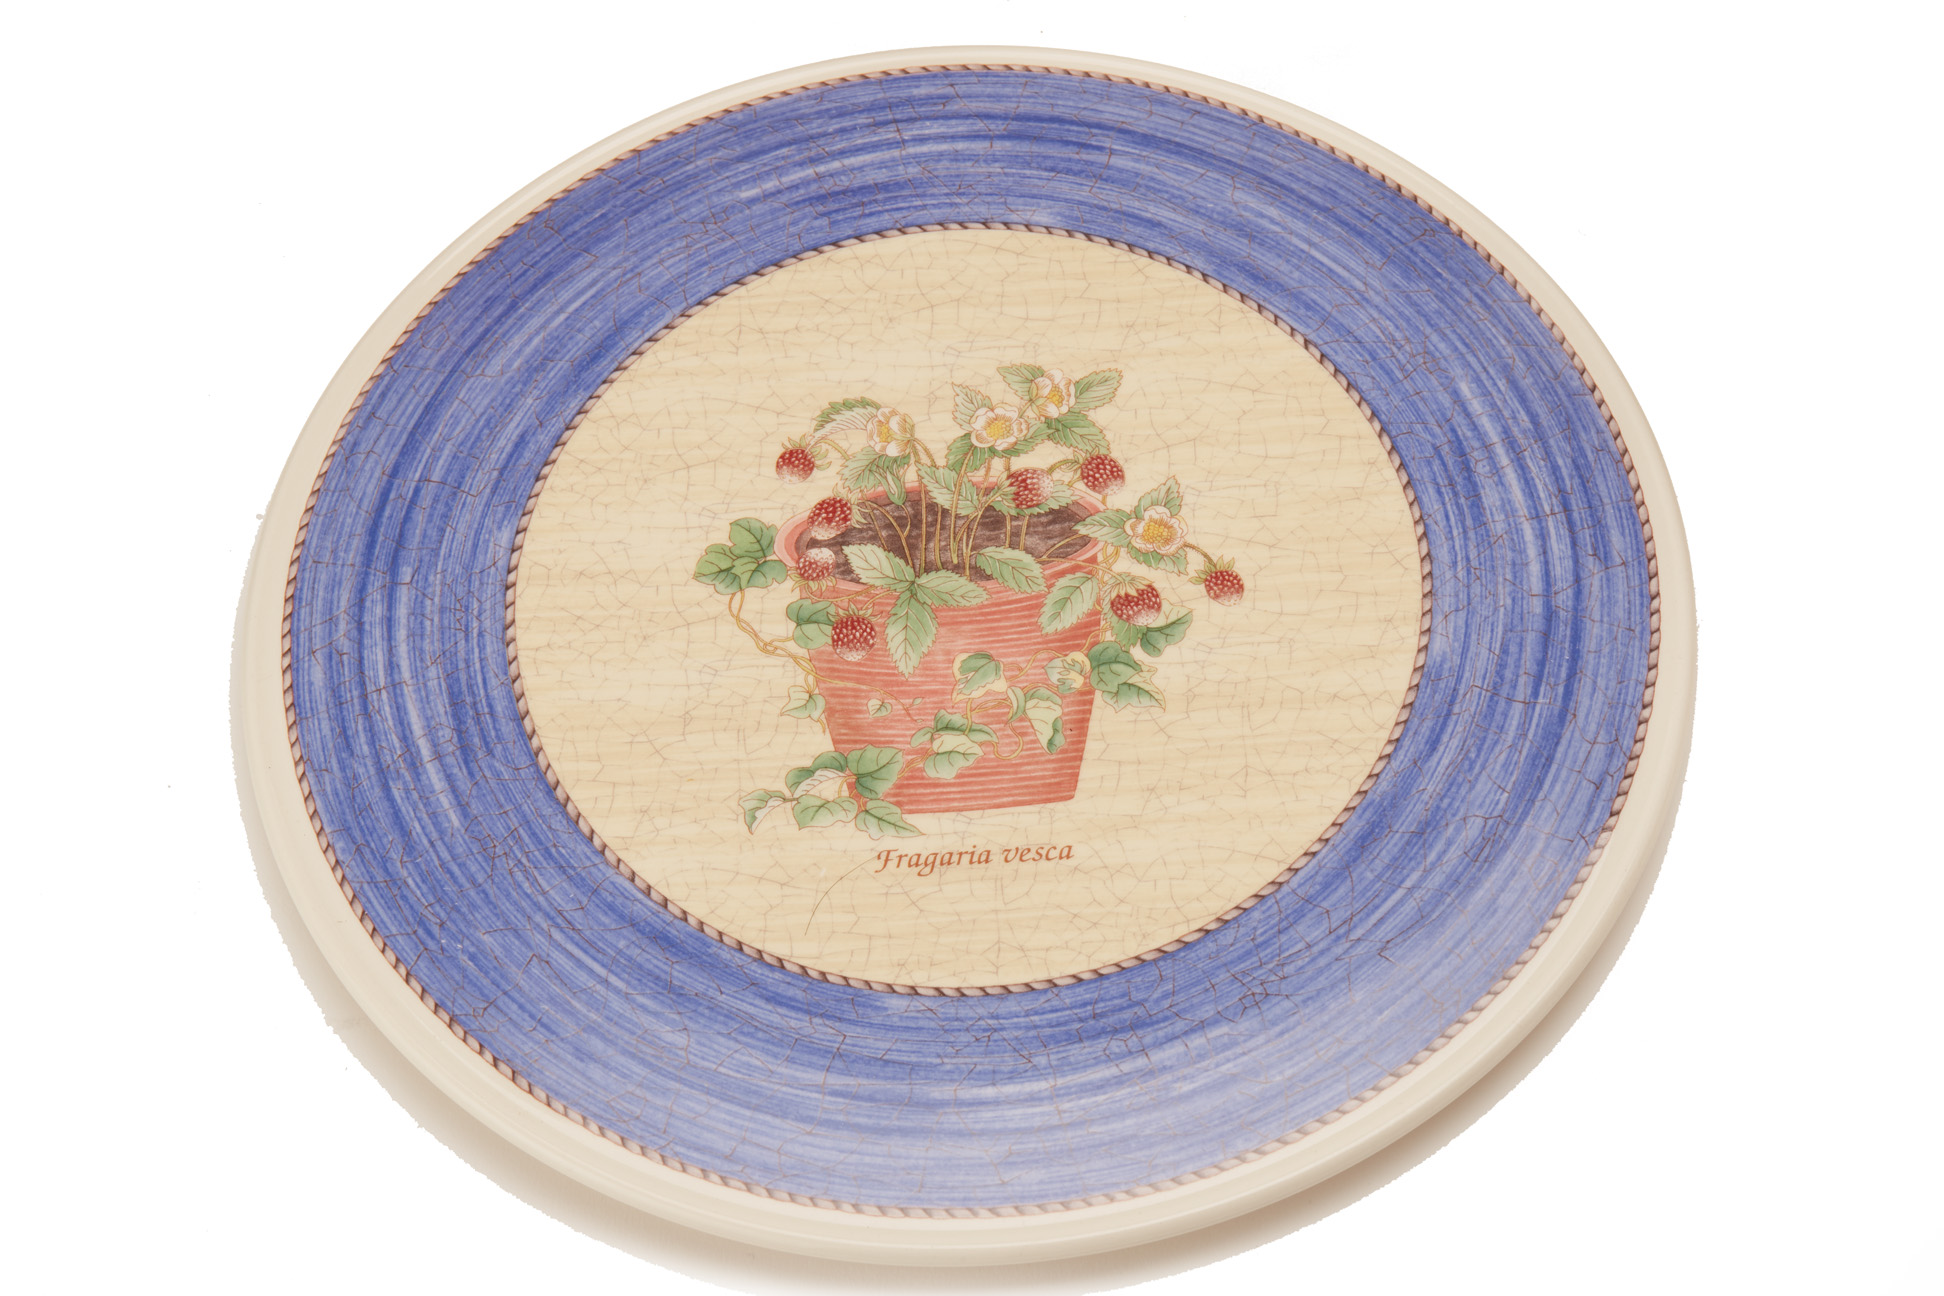 A WEDGWOOD "SARAH'S GARDEN" PATTERN TEA AND DINNER SERVICE - Image 5 of 6